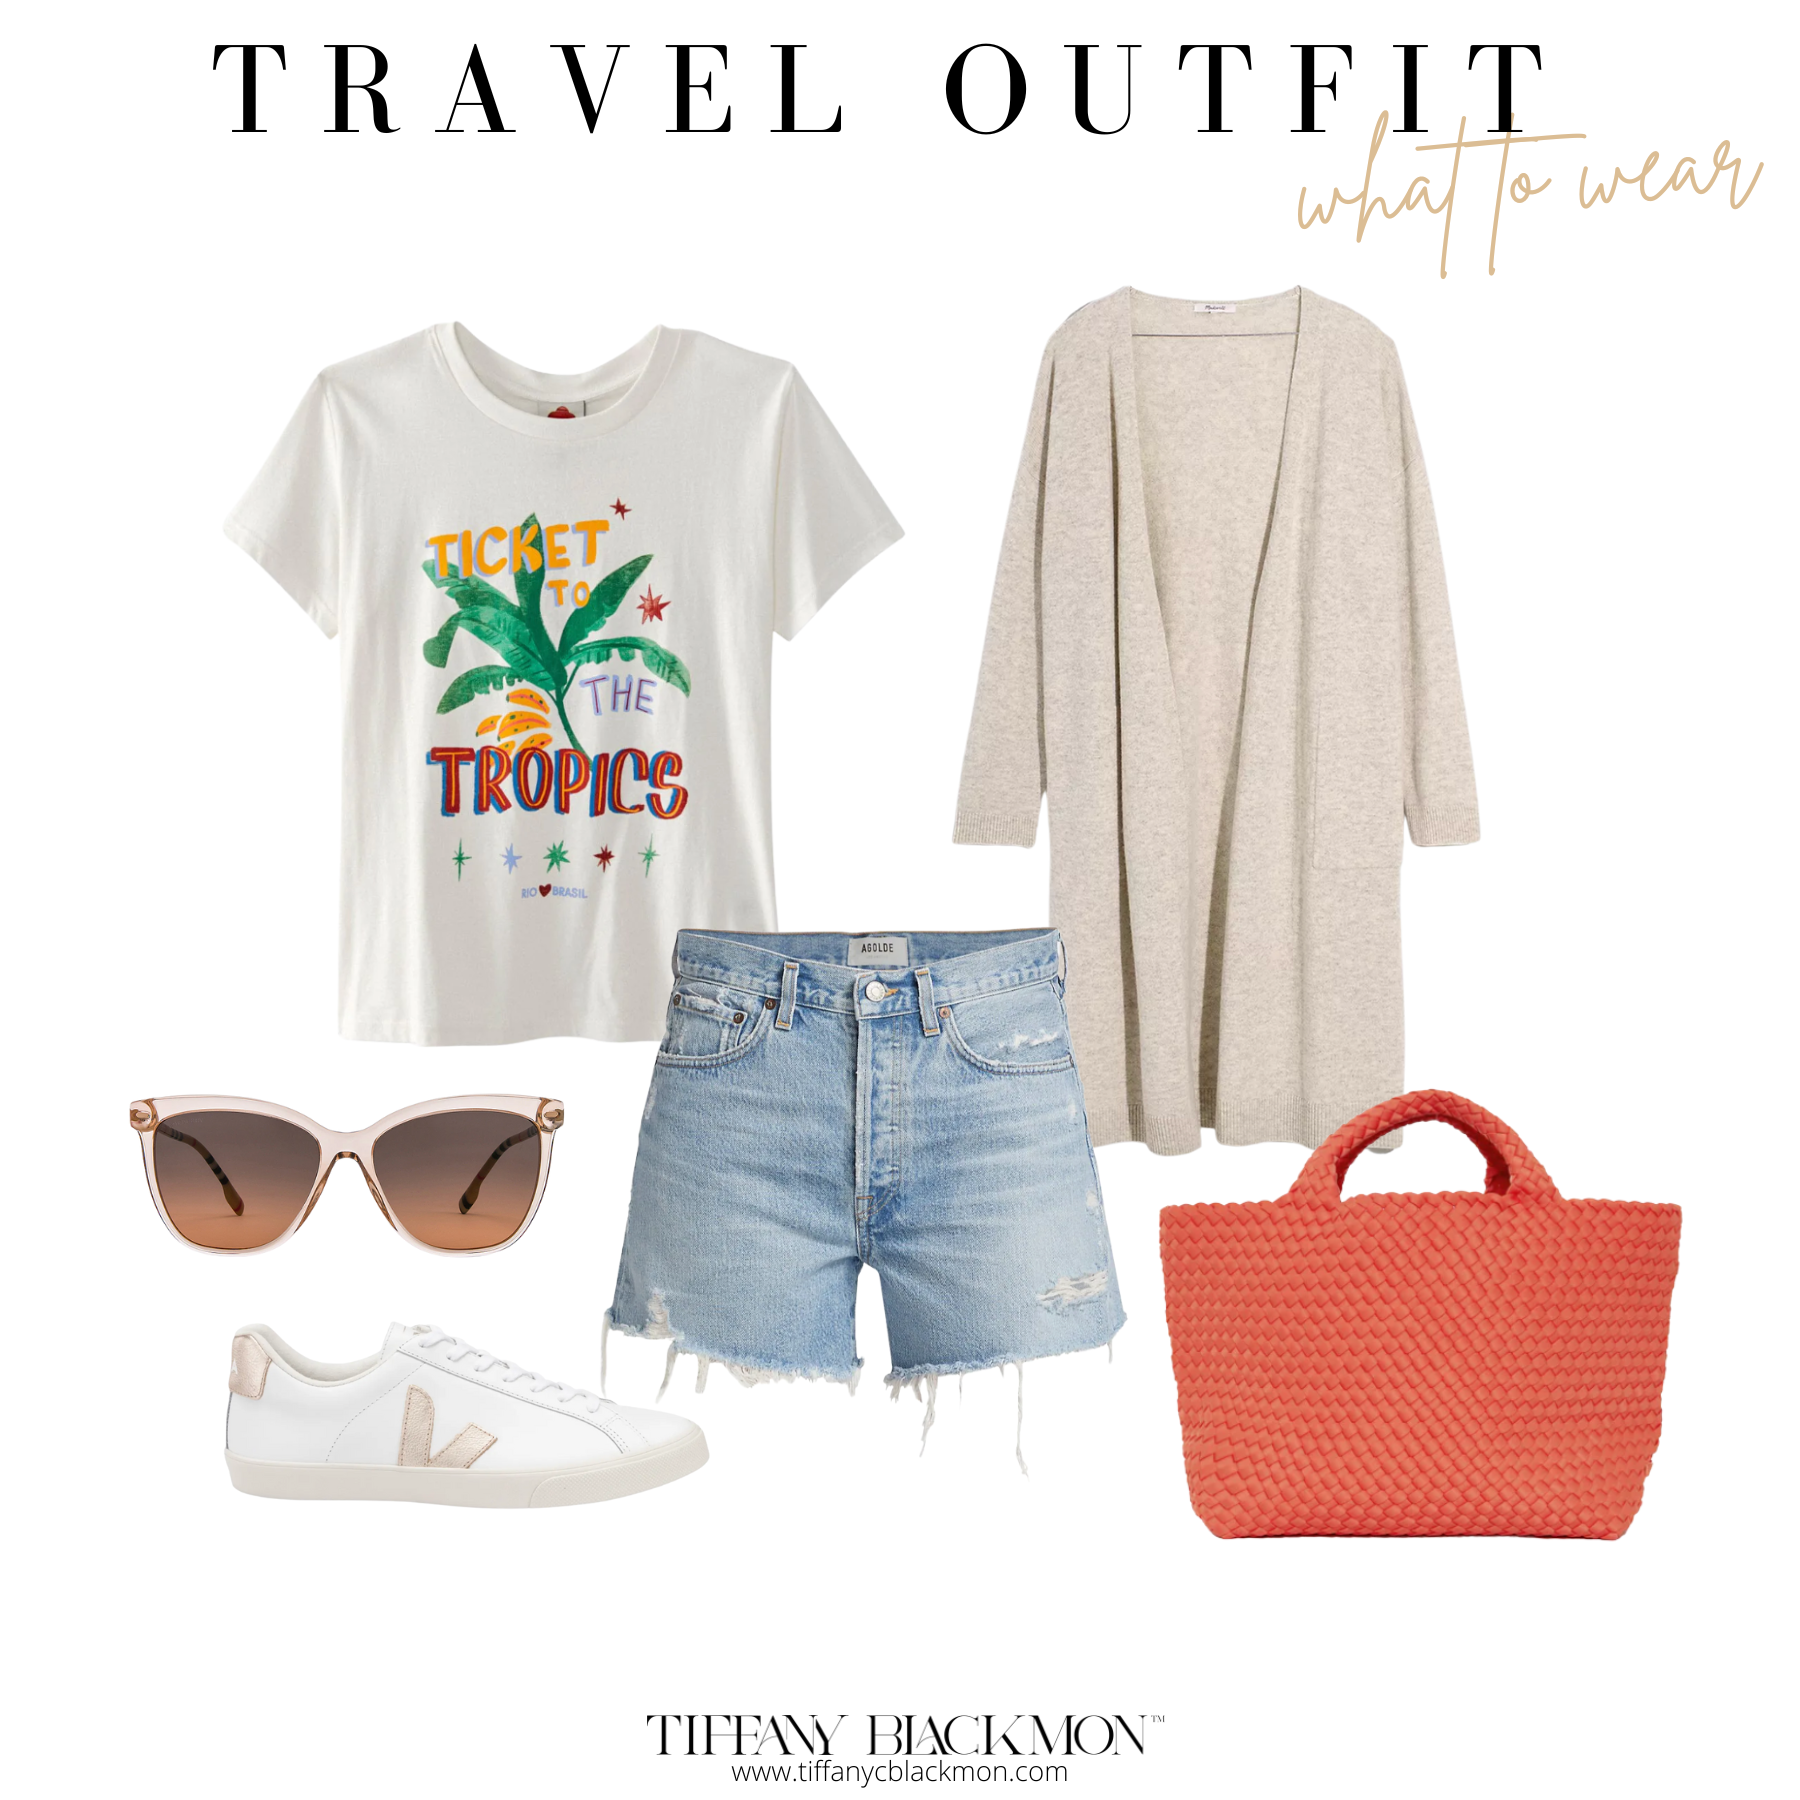 What to Wear: Travel Outfits
#travel #travellooks #airportoutfit #comfy #comfortableoutfits #casualoutfits #springfashion #springoutfits #athleisure #traveling 